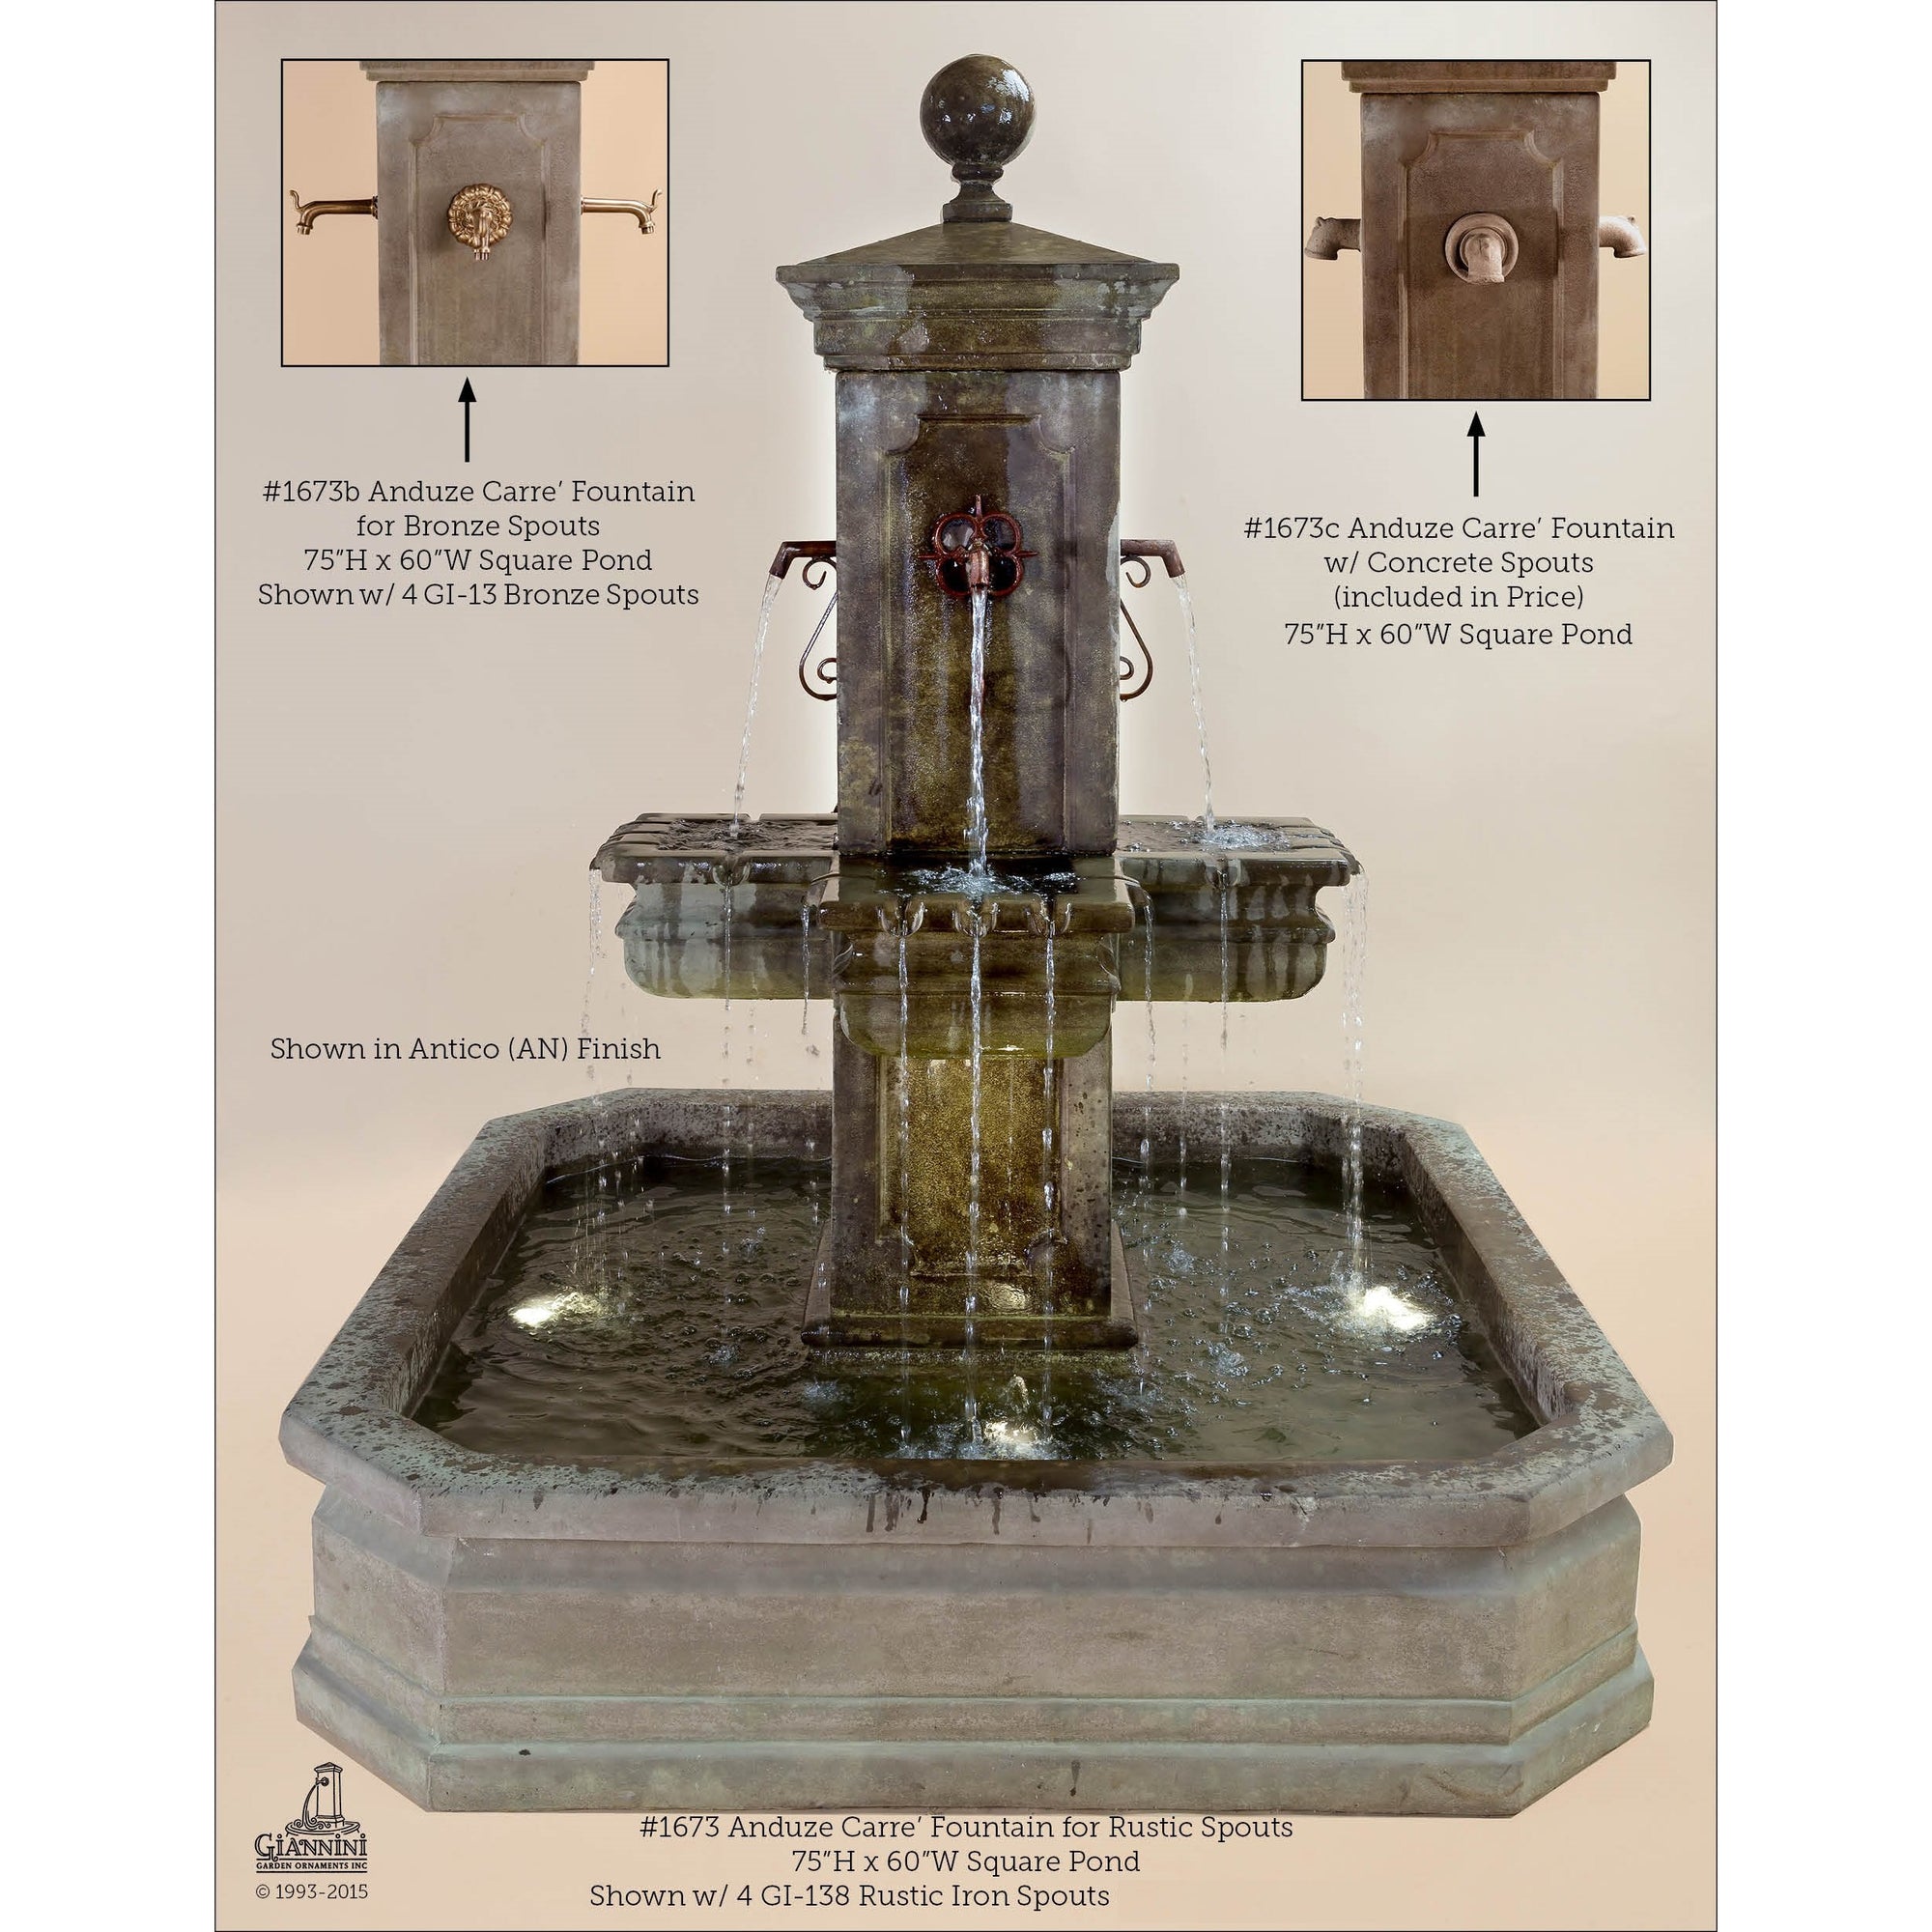 Anduze Concrete Carre Outdoor Courtyard Fountain with Square Pond Kit - Fountain, Pond, Pump and Choice of Spouts - Majestic Fountains